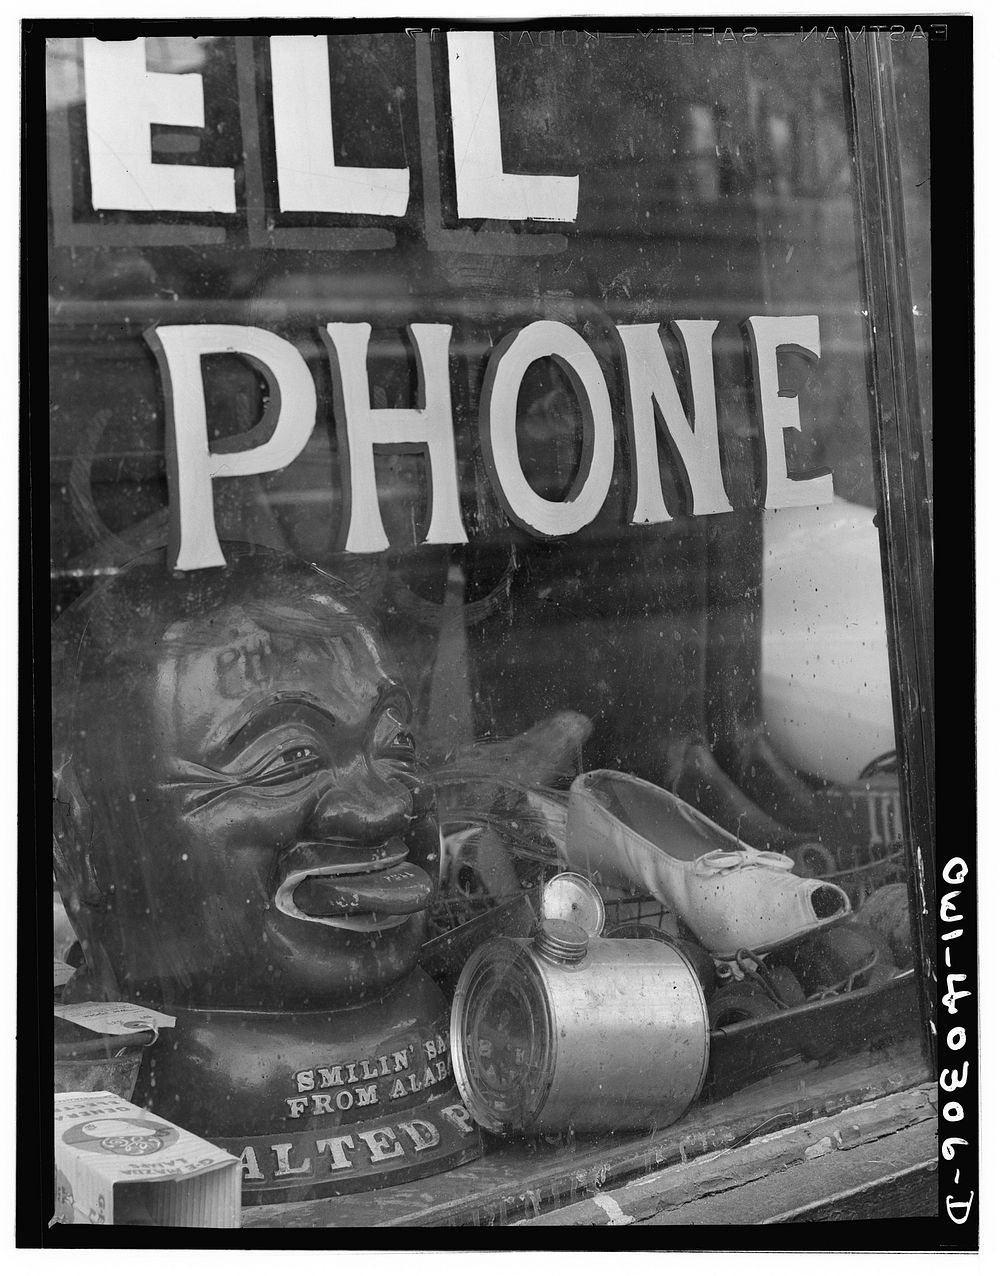 Washington, D.C. A pawnshop window. Sourced from the Library of Congress.